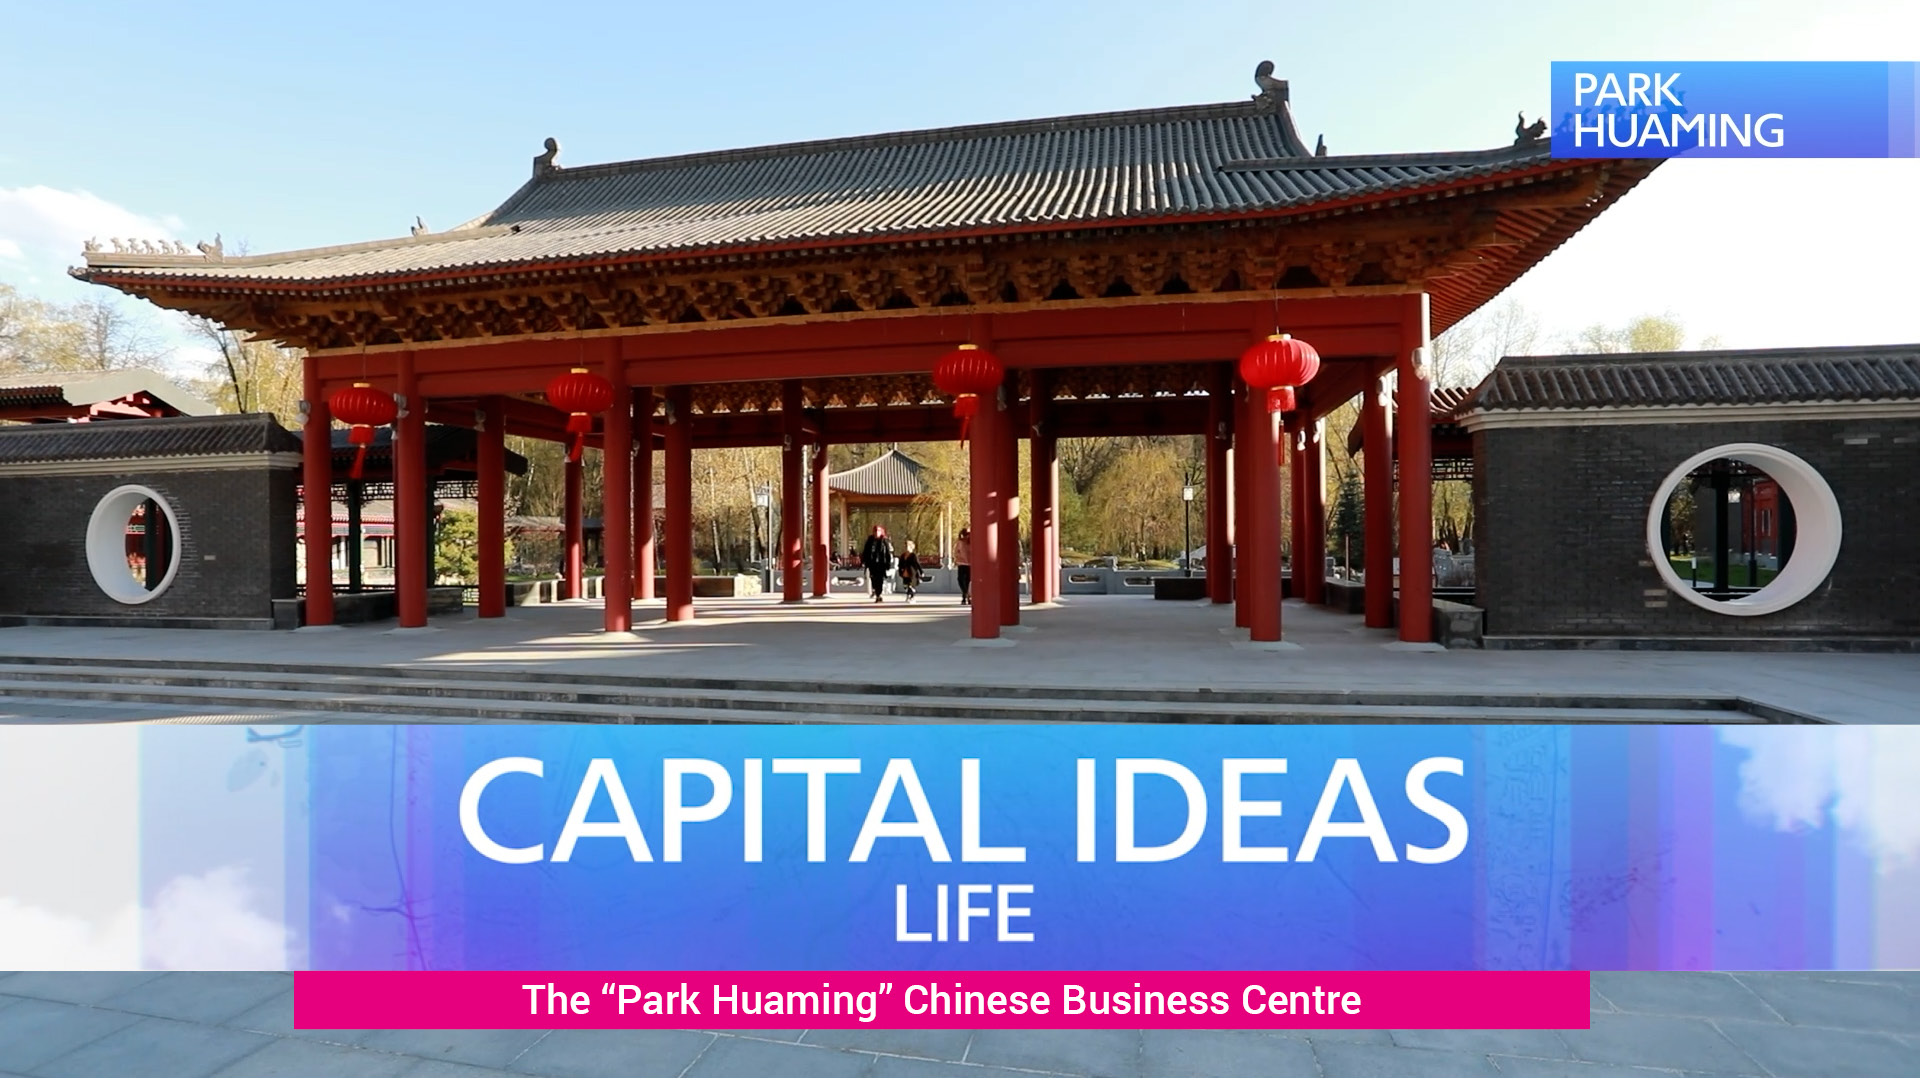 Capital Ideas Life. The “Park Huaming” Chinese Business Centre